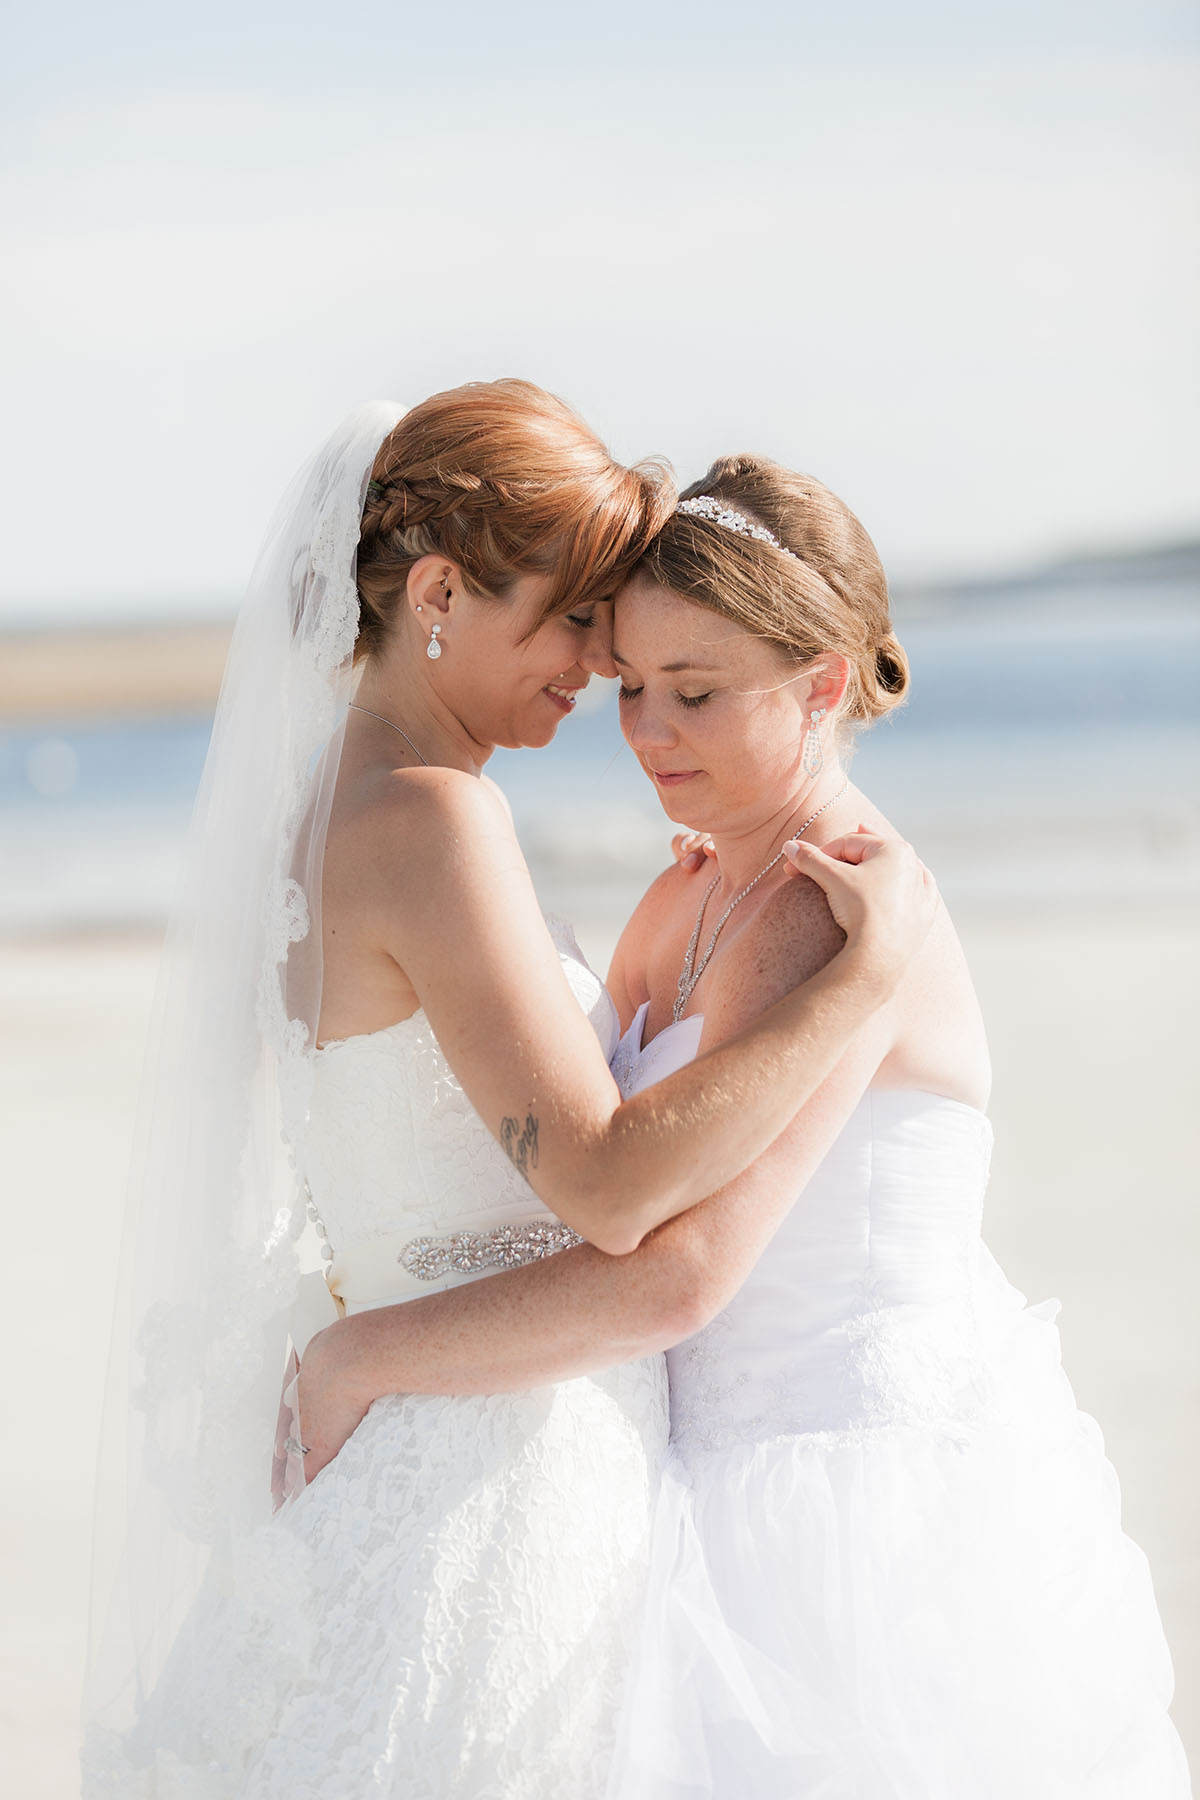 Beach wedding in Kennebunkport, Maine two brides long white dresses summer bouquets cuddling intimate